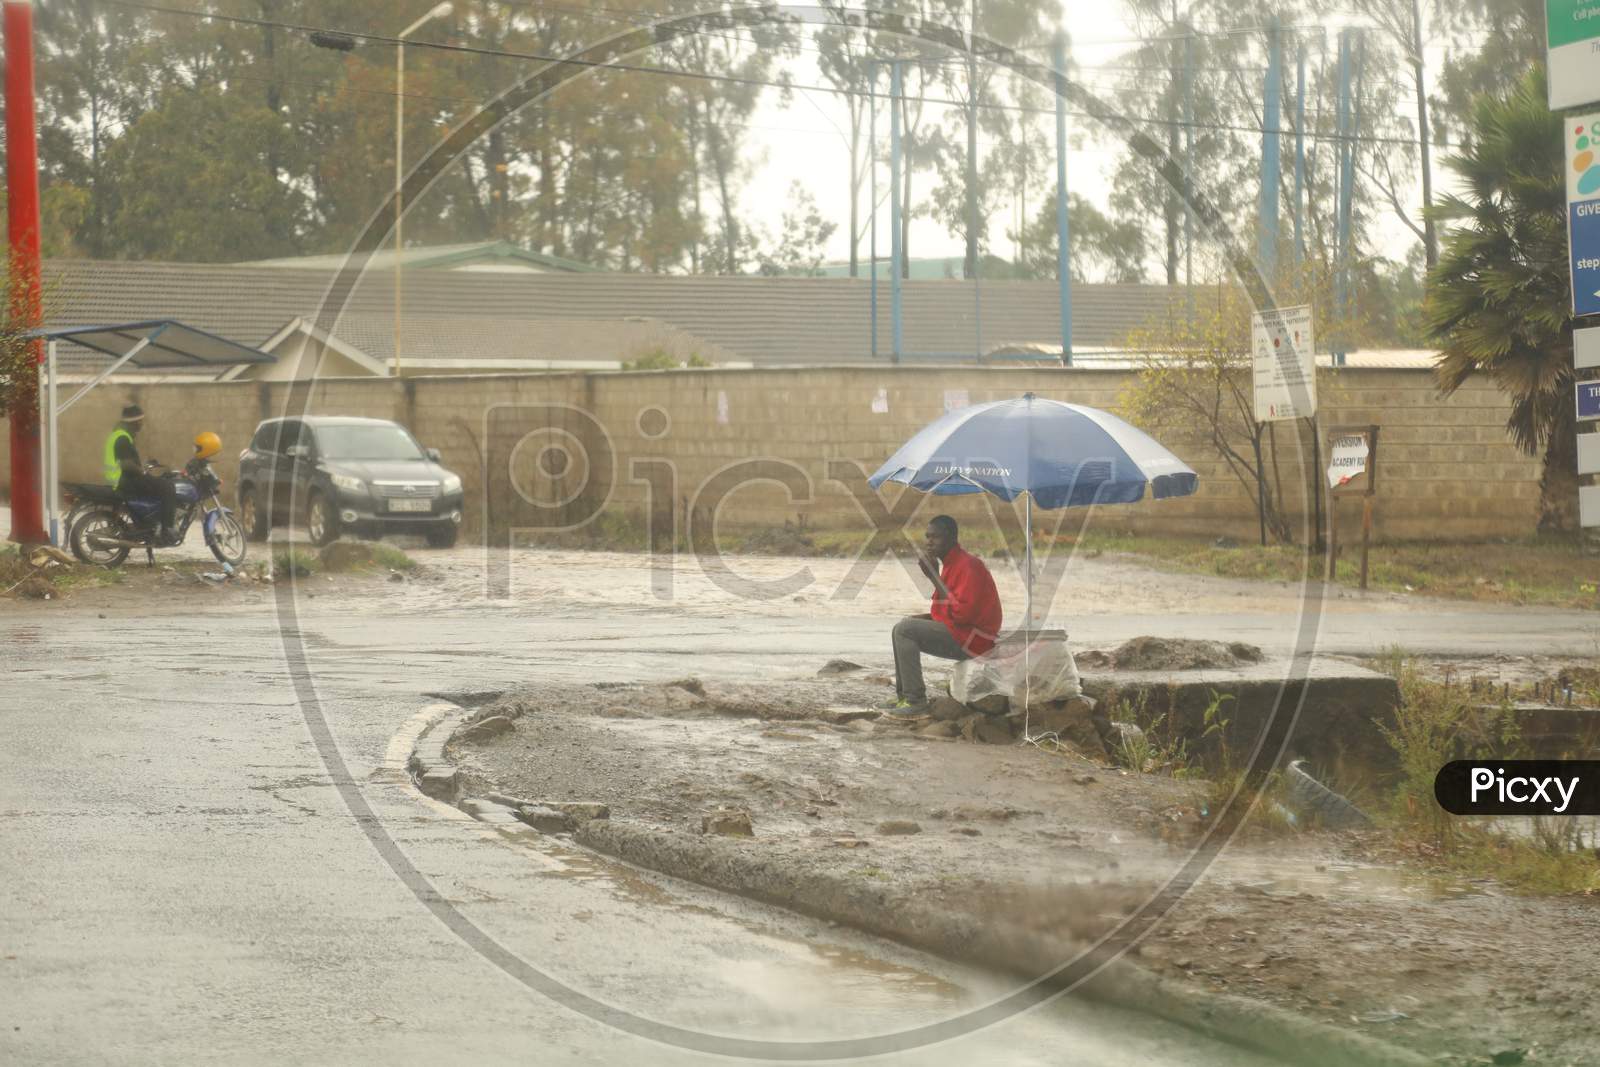 A man sitting by the road in Kenya